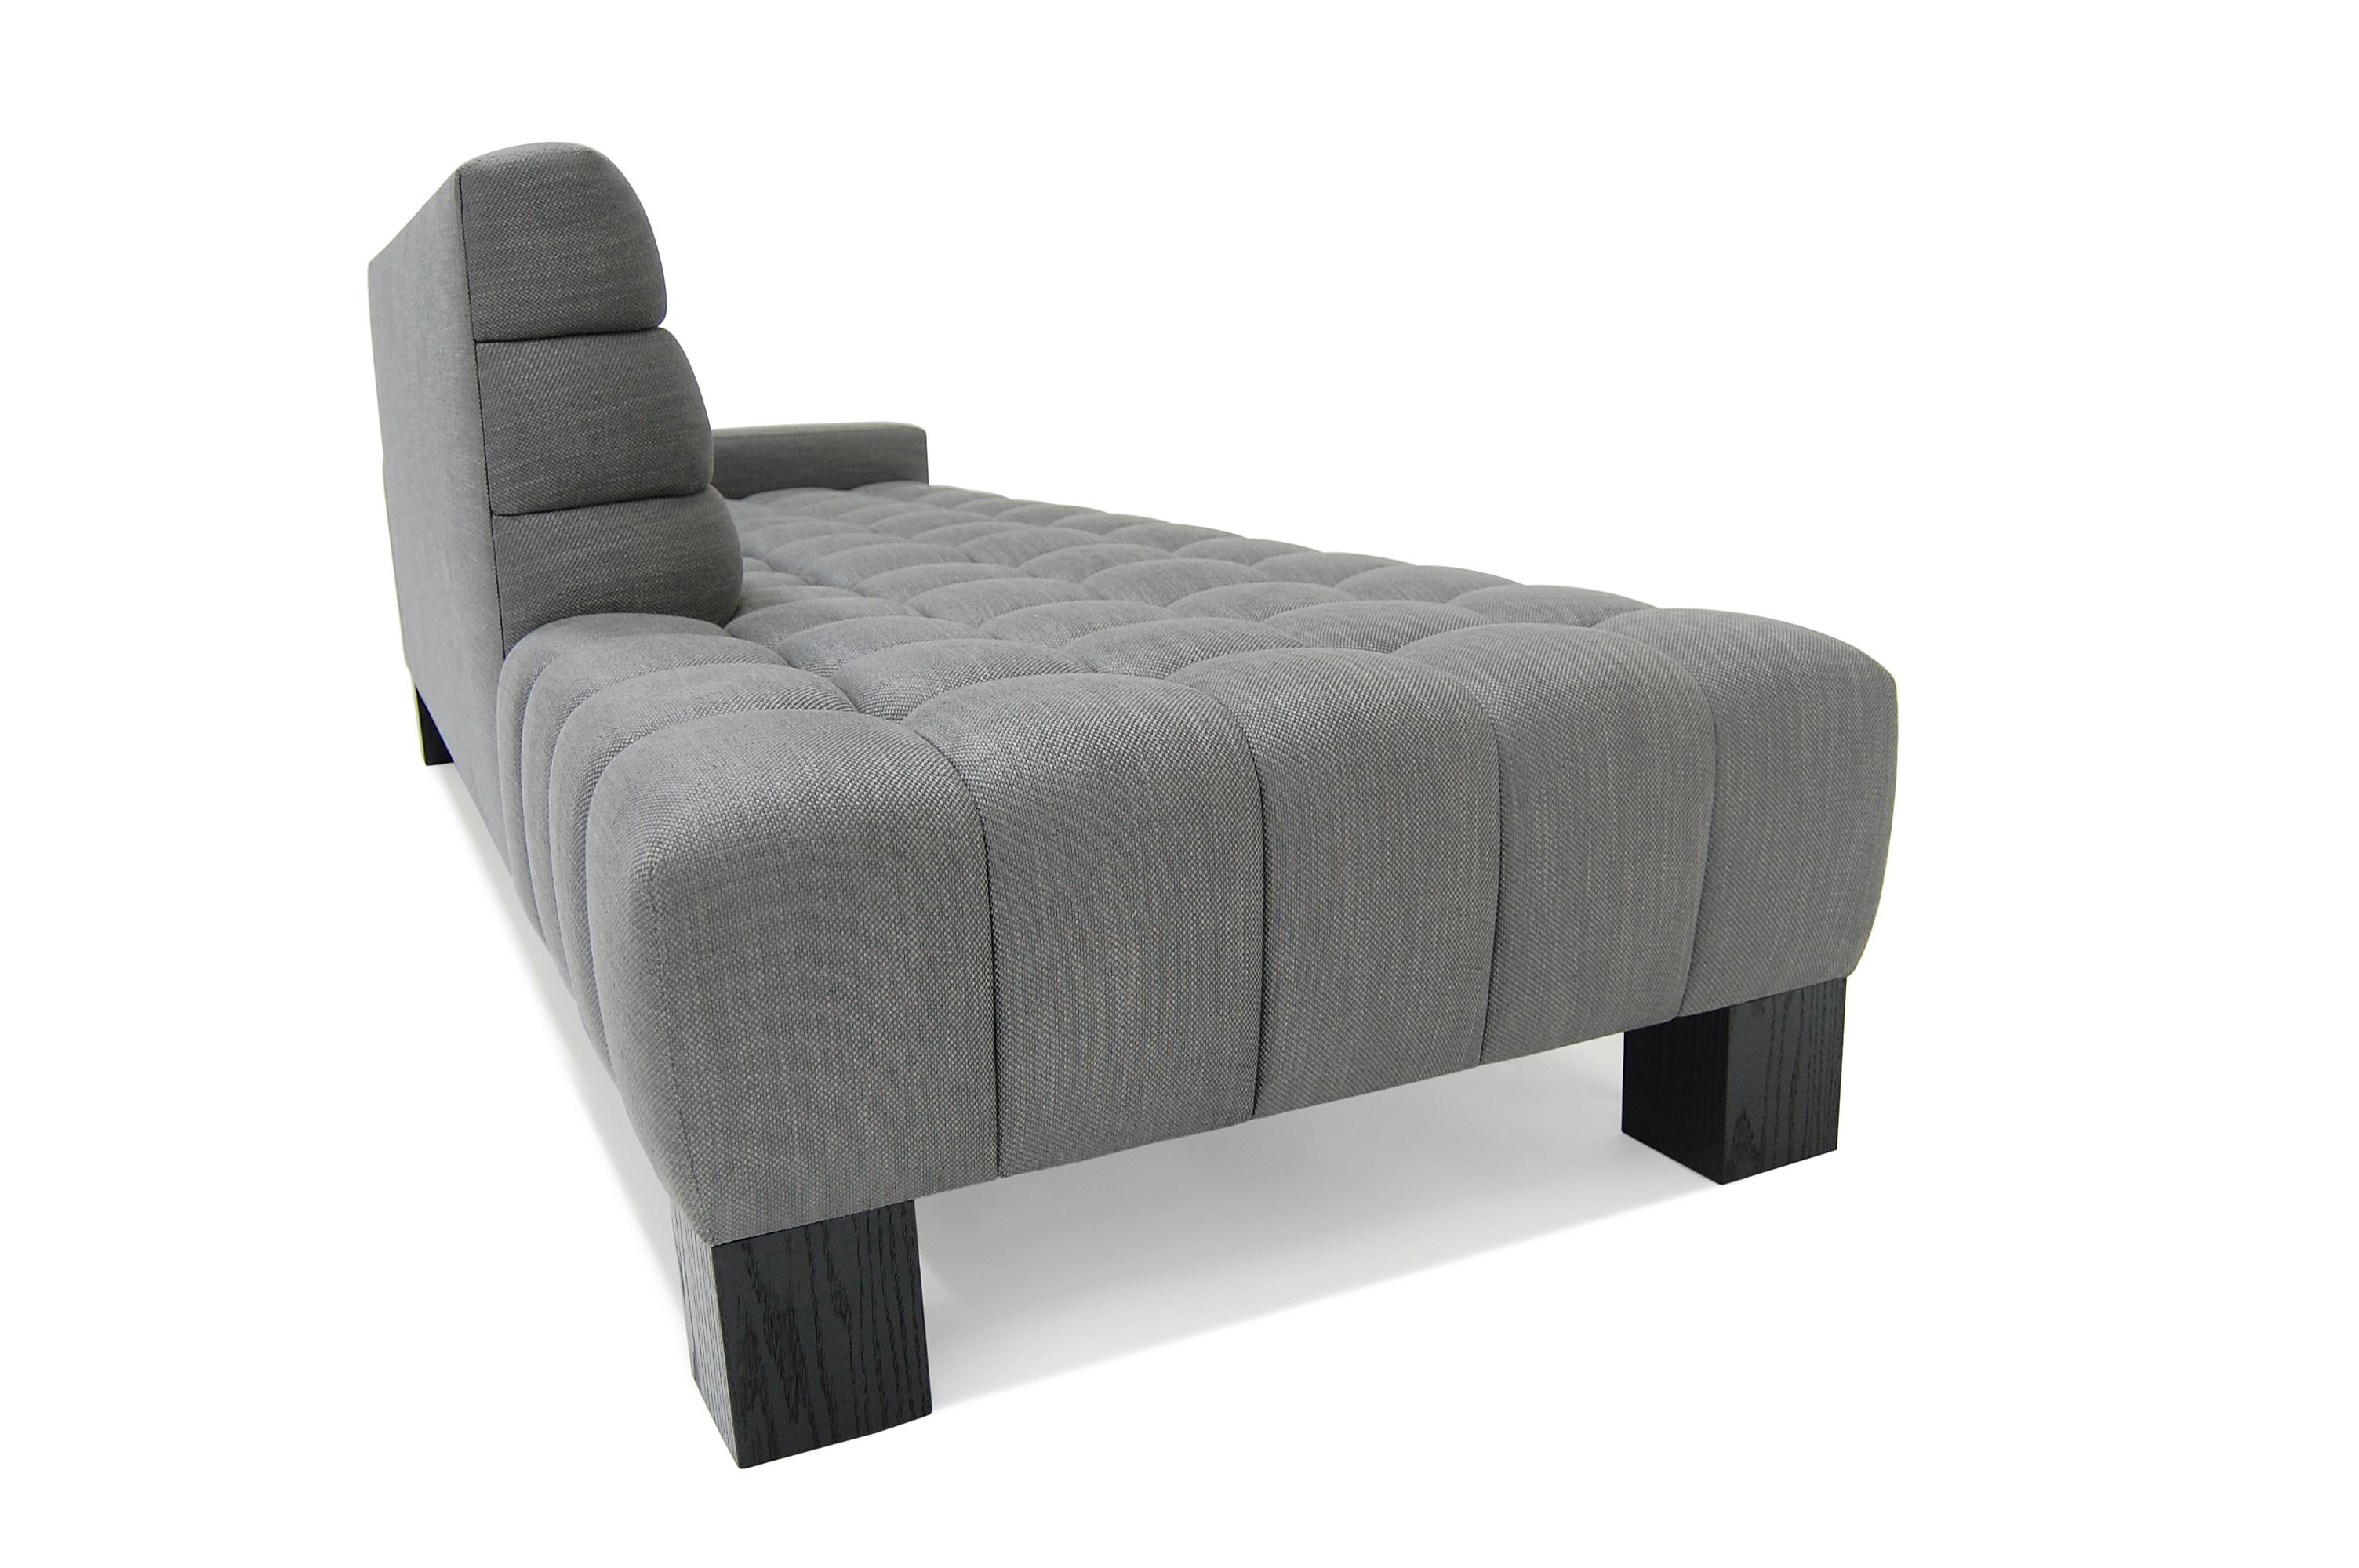 Fabric Abyss Mini Sofa Chaise Channeling Deep Tufted Wood Legs Grey Custom For Sale